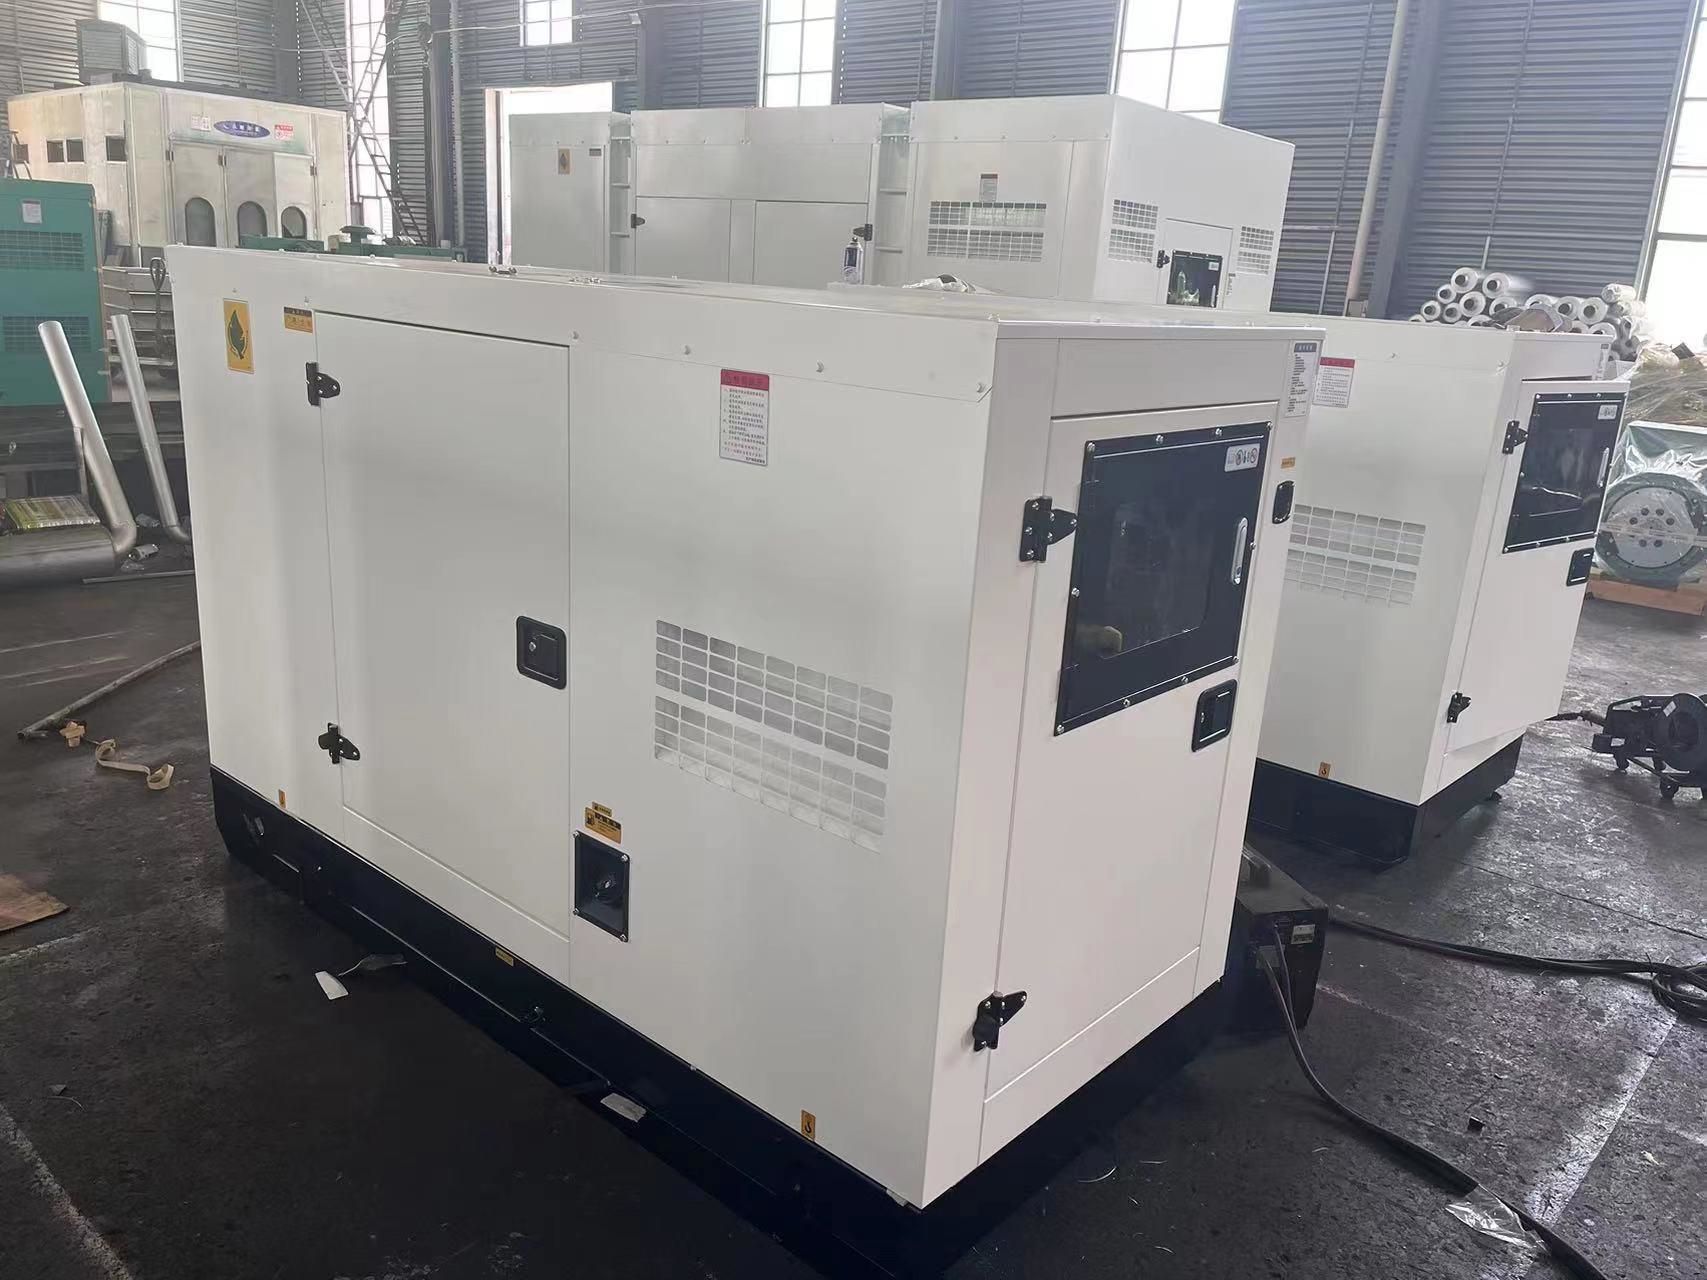 Yangzhou East Power Equipment Co., Ltd. Two Units 30KW and One Unit 500KW Cummins with Stanford silent diesel generator set were ready for sending to Vietnam!